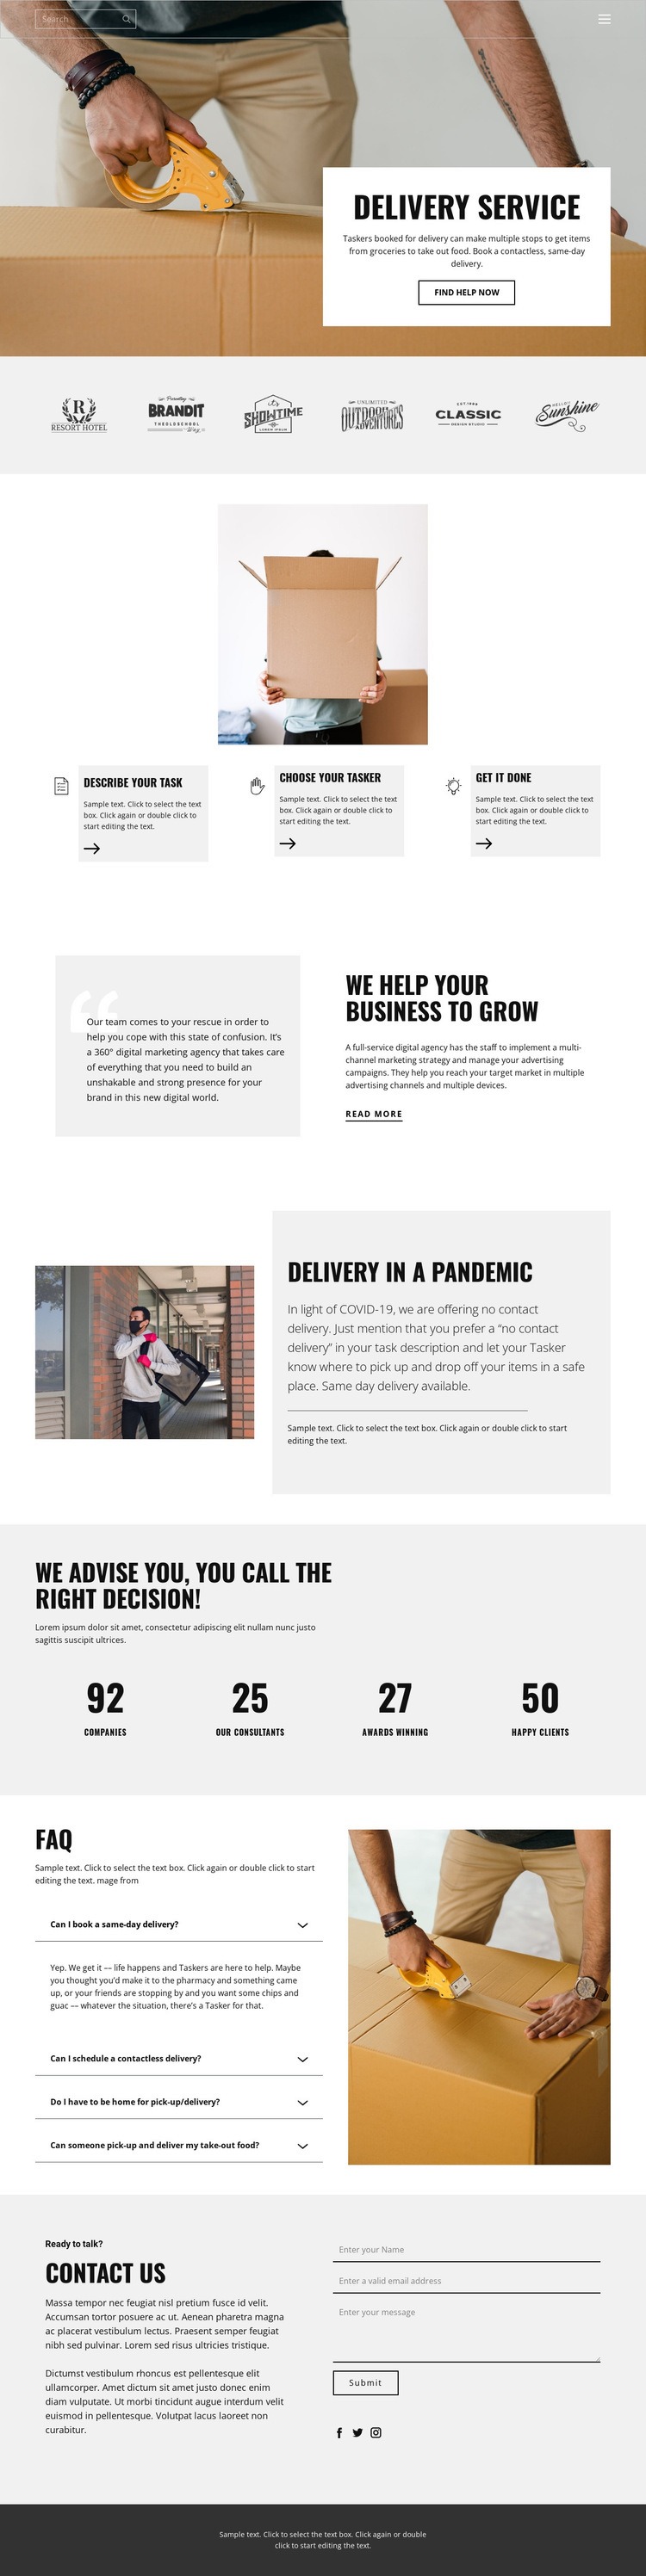 Fast and high quality delivery Wix Template Alternative